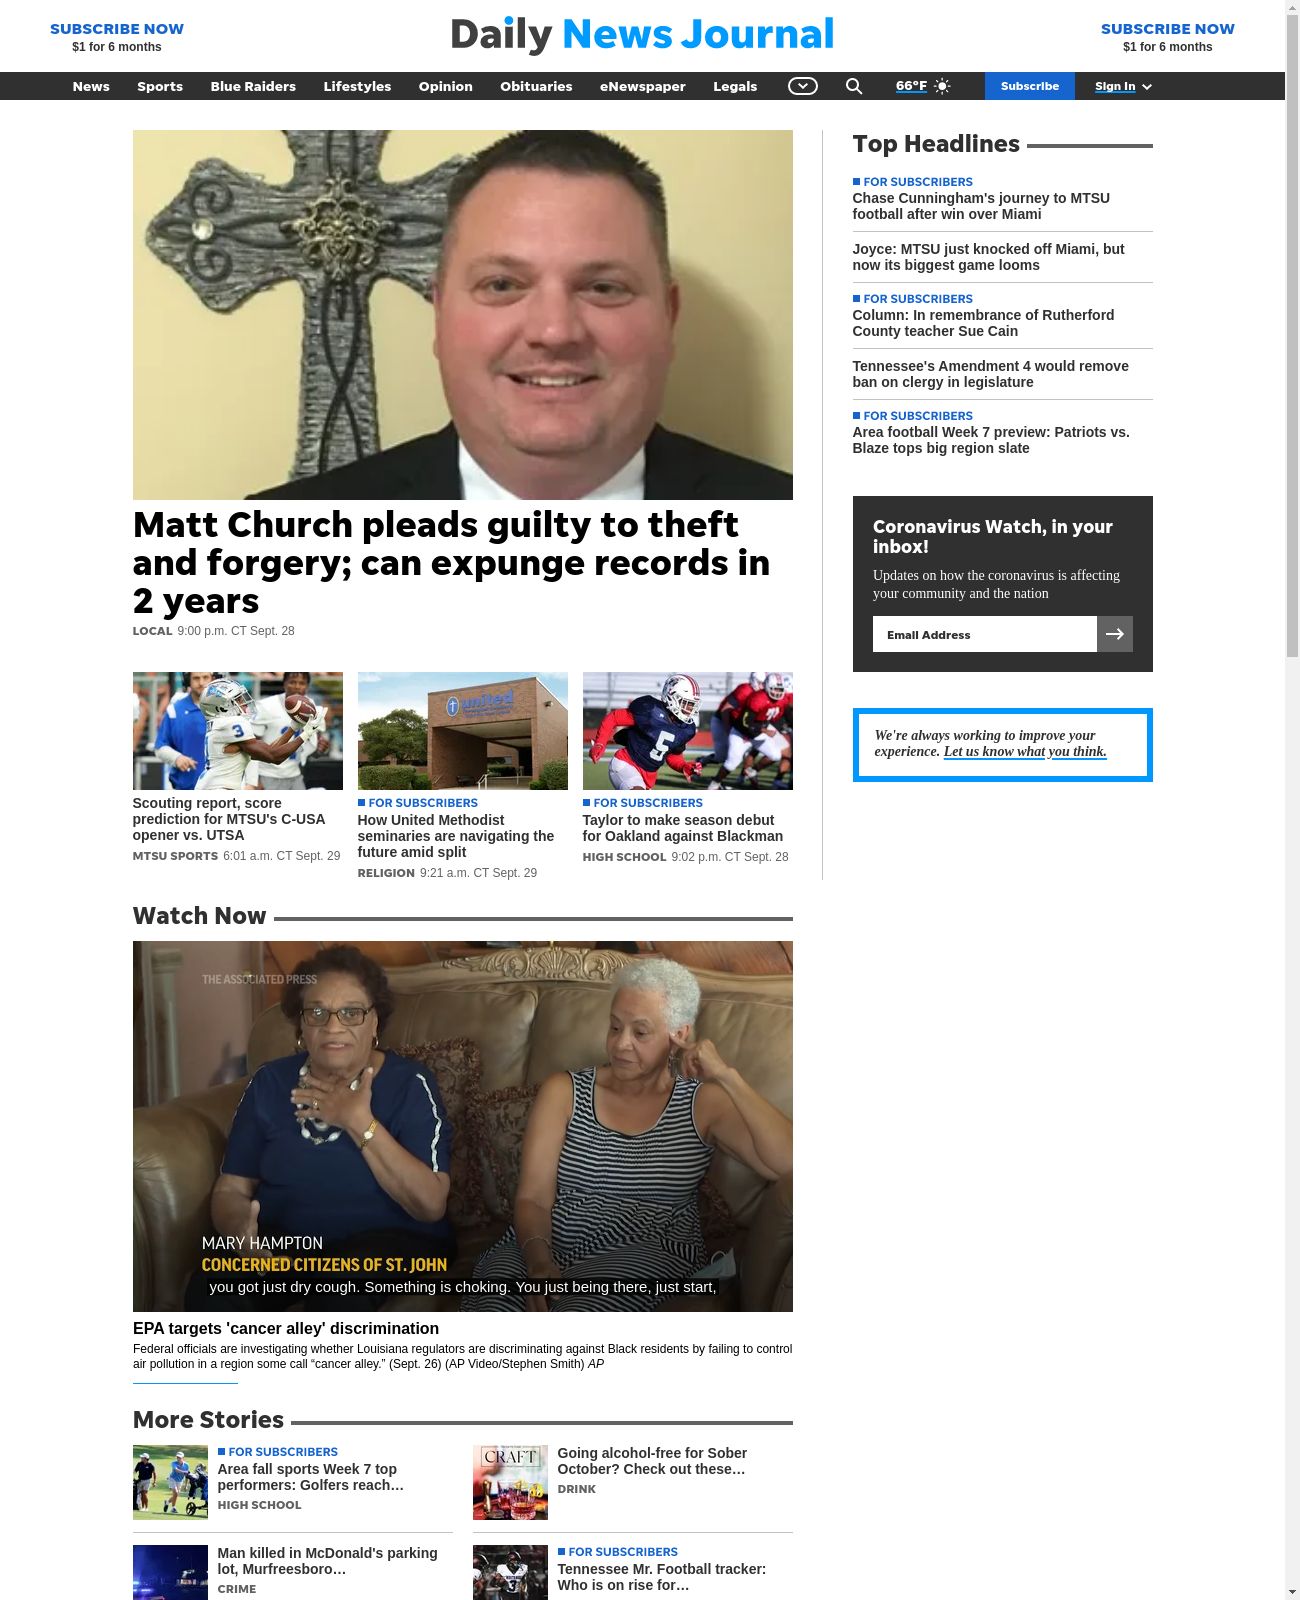 Murfreesboro Daily News Journal at 2022-09-29 12:45:27-05:00 local time